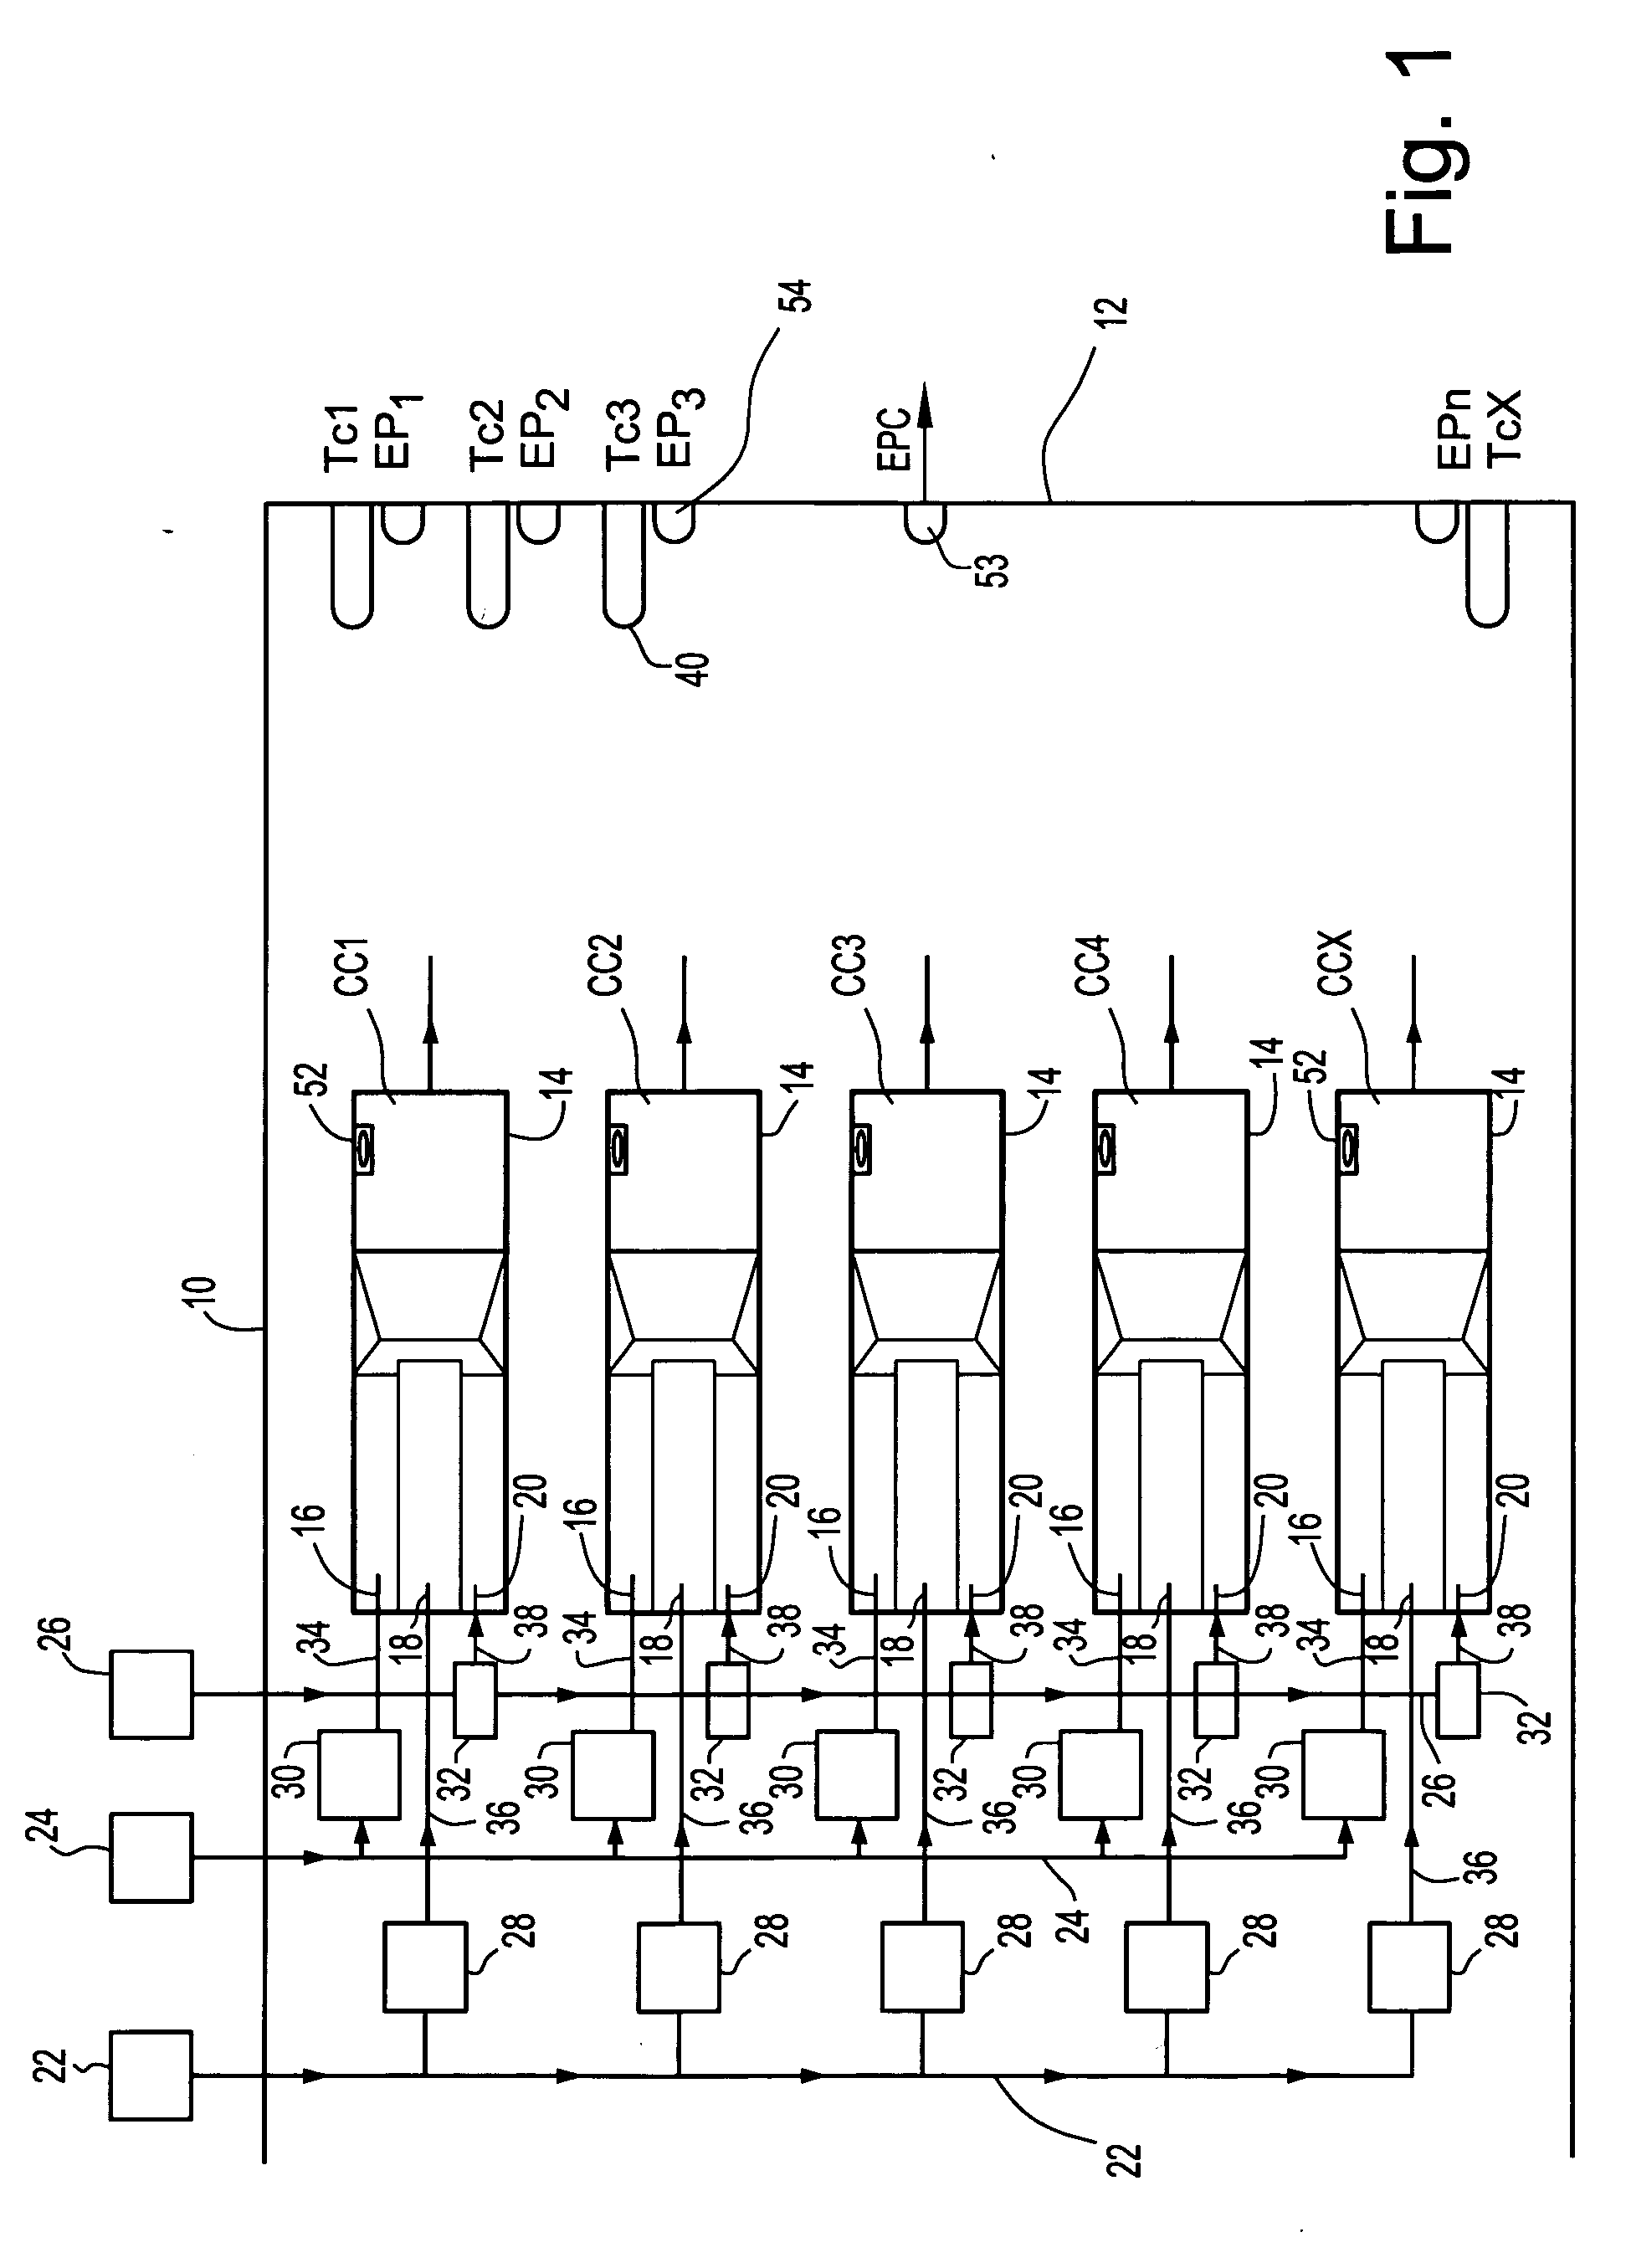 Method and apparatus for automatically actuating fuel trim valves in a gas